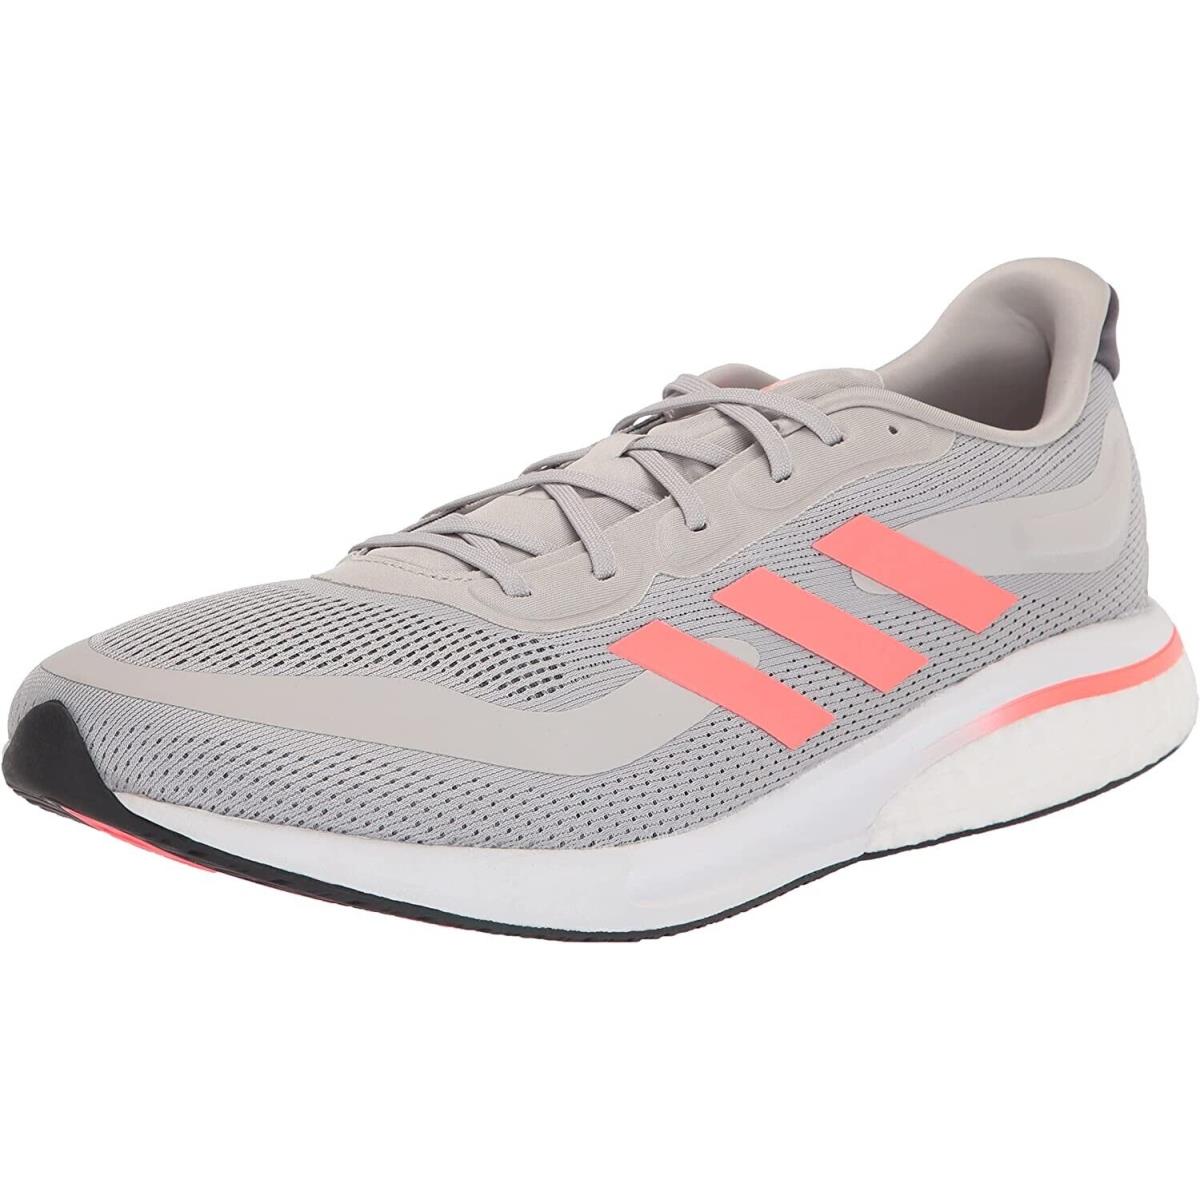 Adidas Men`s Supernova M Running Shoe JX2961 Size 11 US IN The Box - Grey Two/Turbo/Grey Two